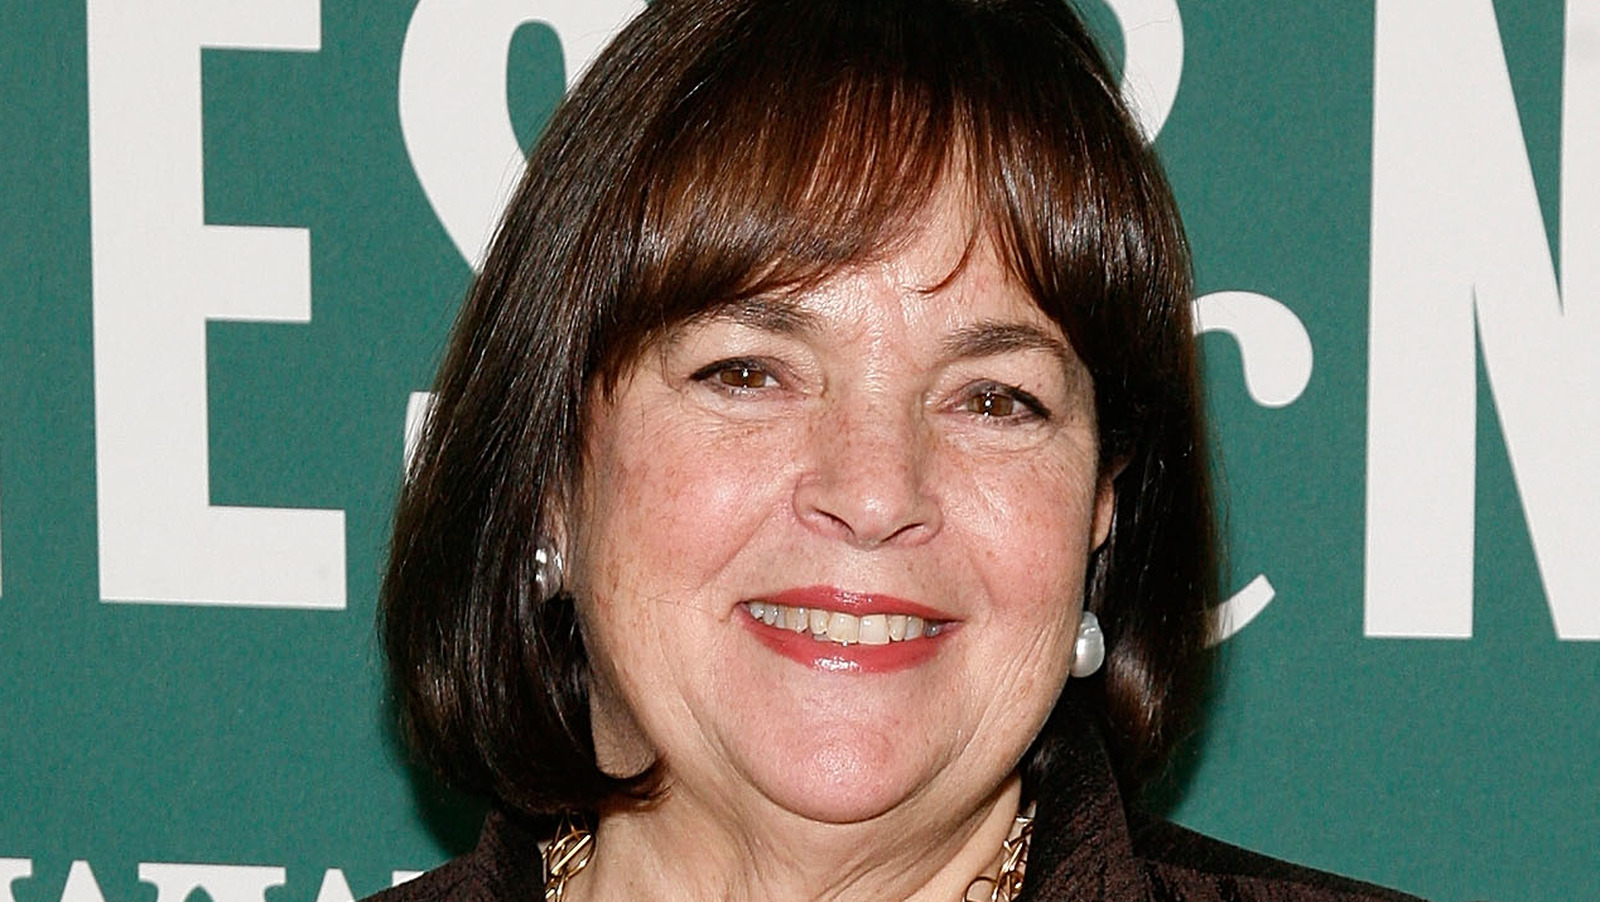 The Serious Lasagna Shortcut Ina Garten Swears By When Entertaining – Tasting Table